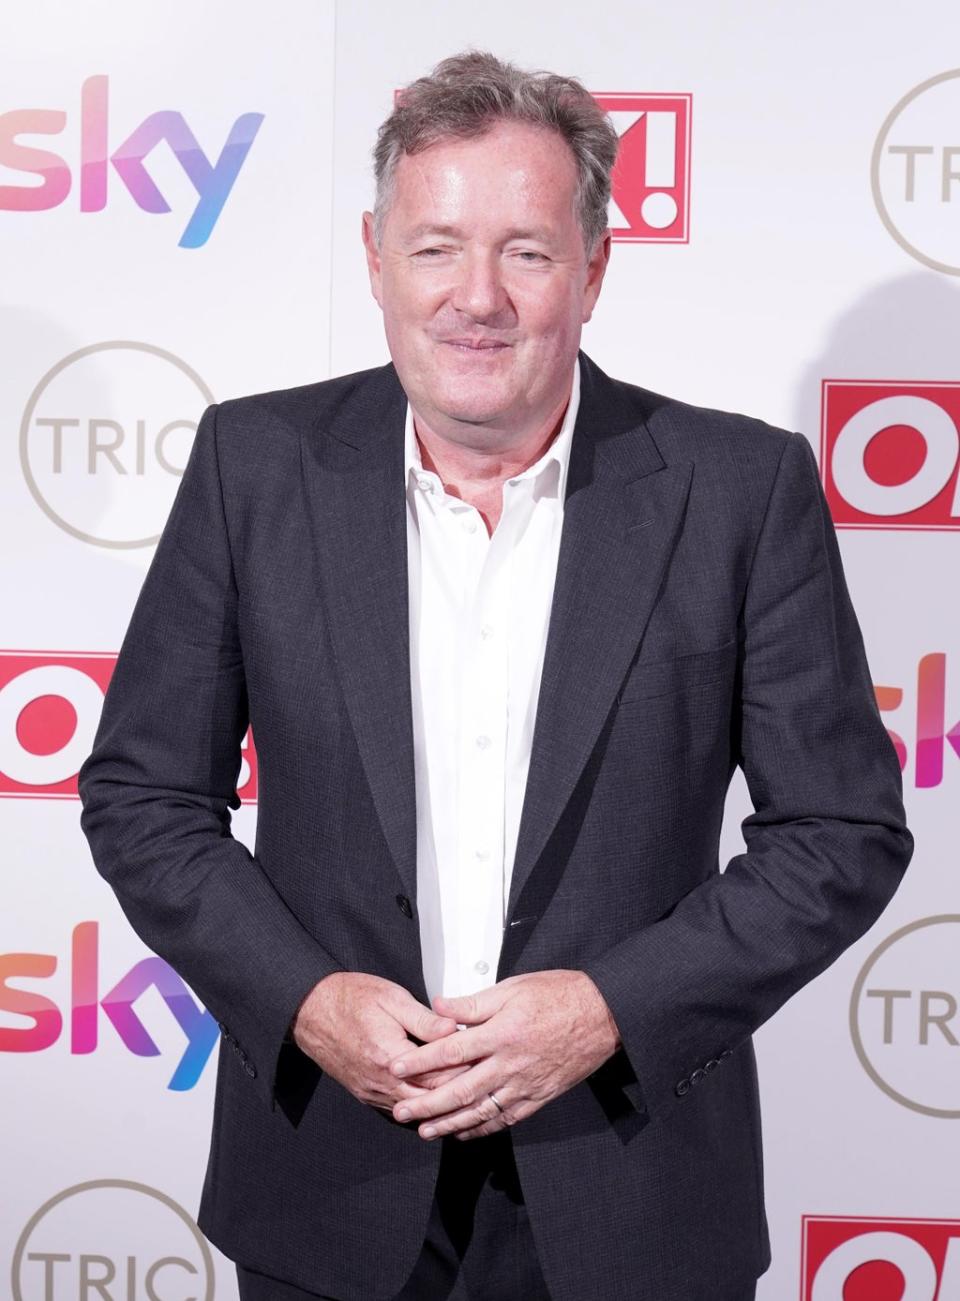 Piers Morgan will host a new TV show airing on weeknights in the UK, US and Australia (Ian West/PA) (PA Wire)